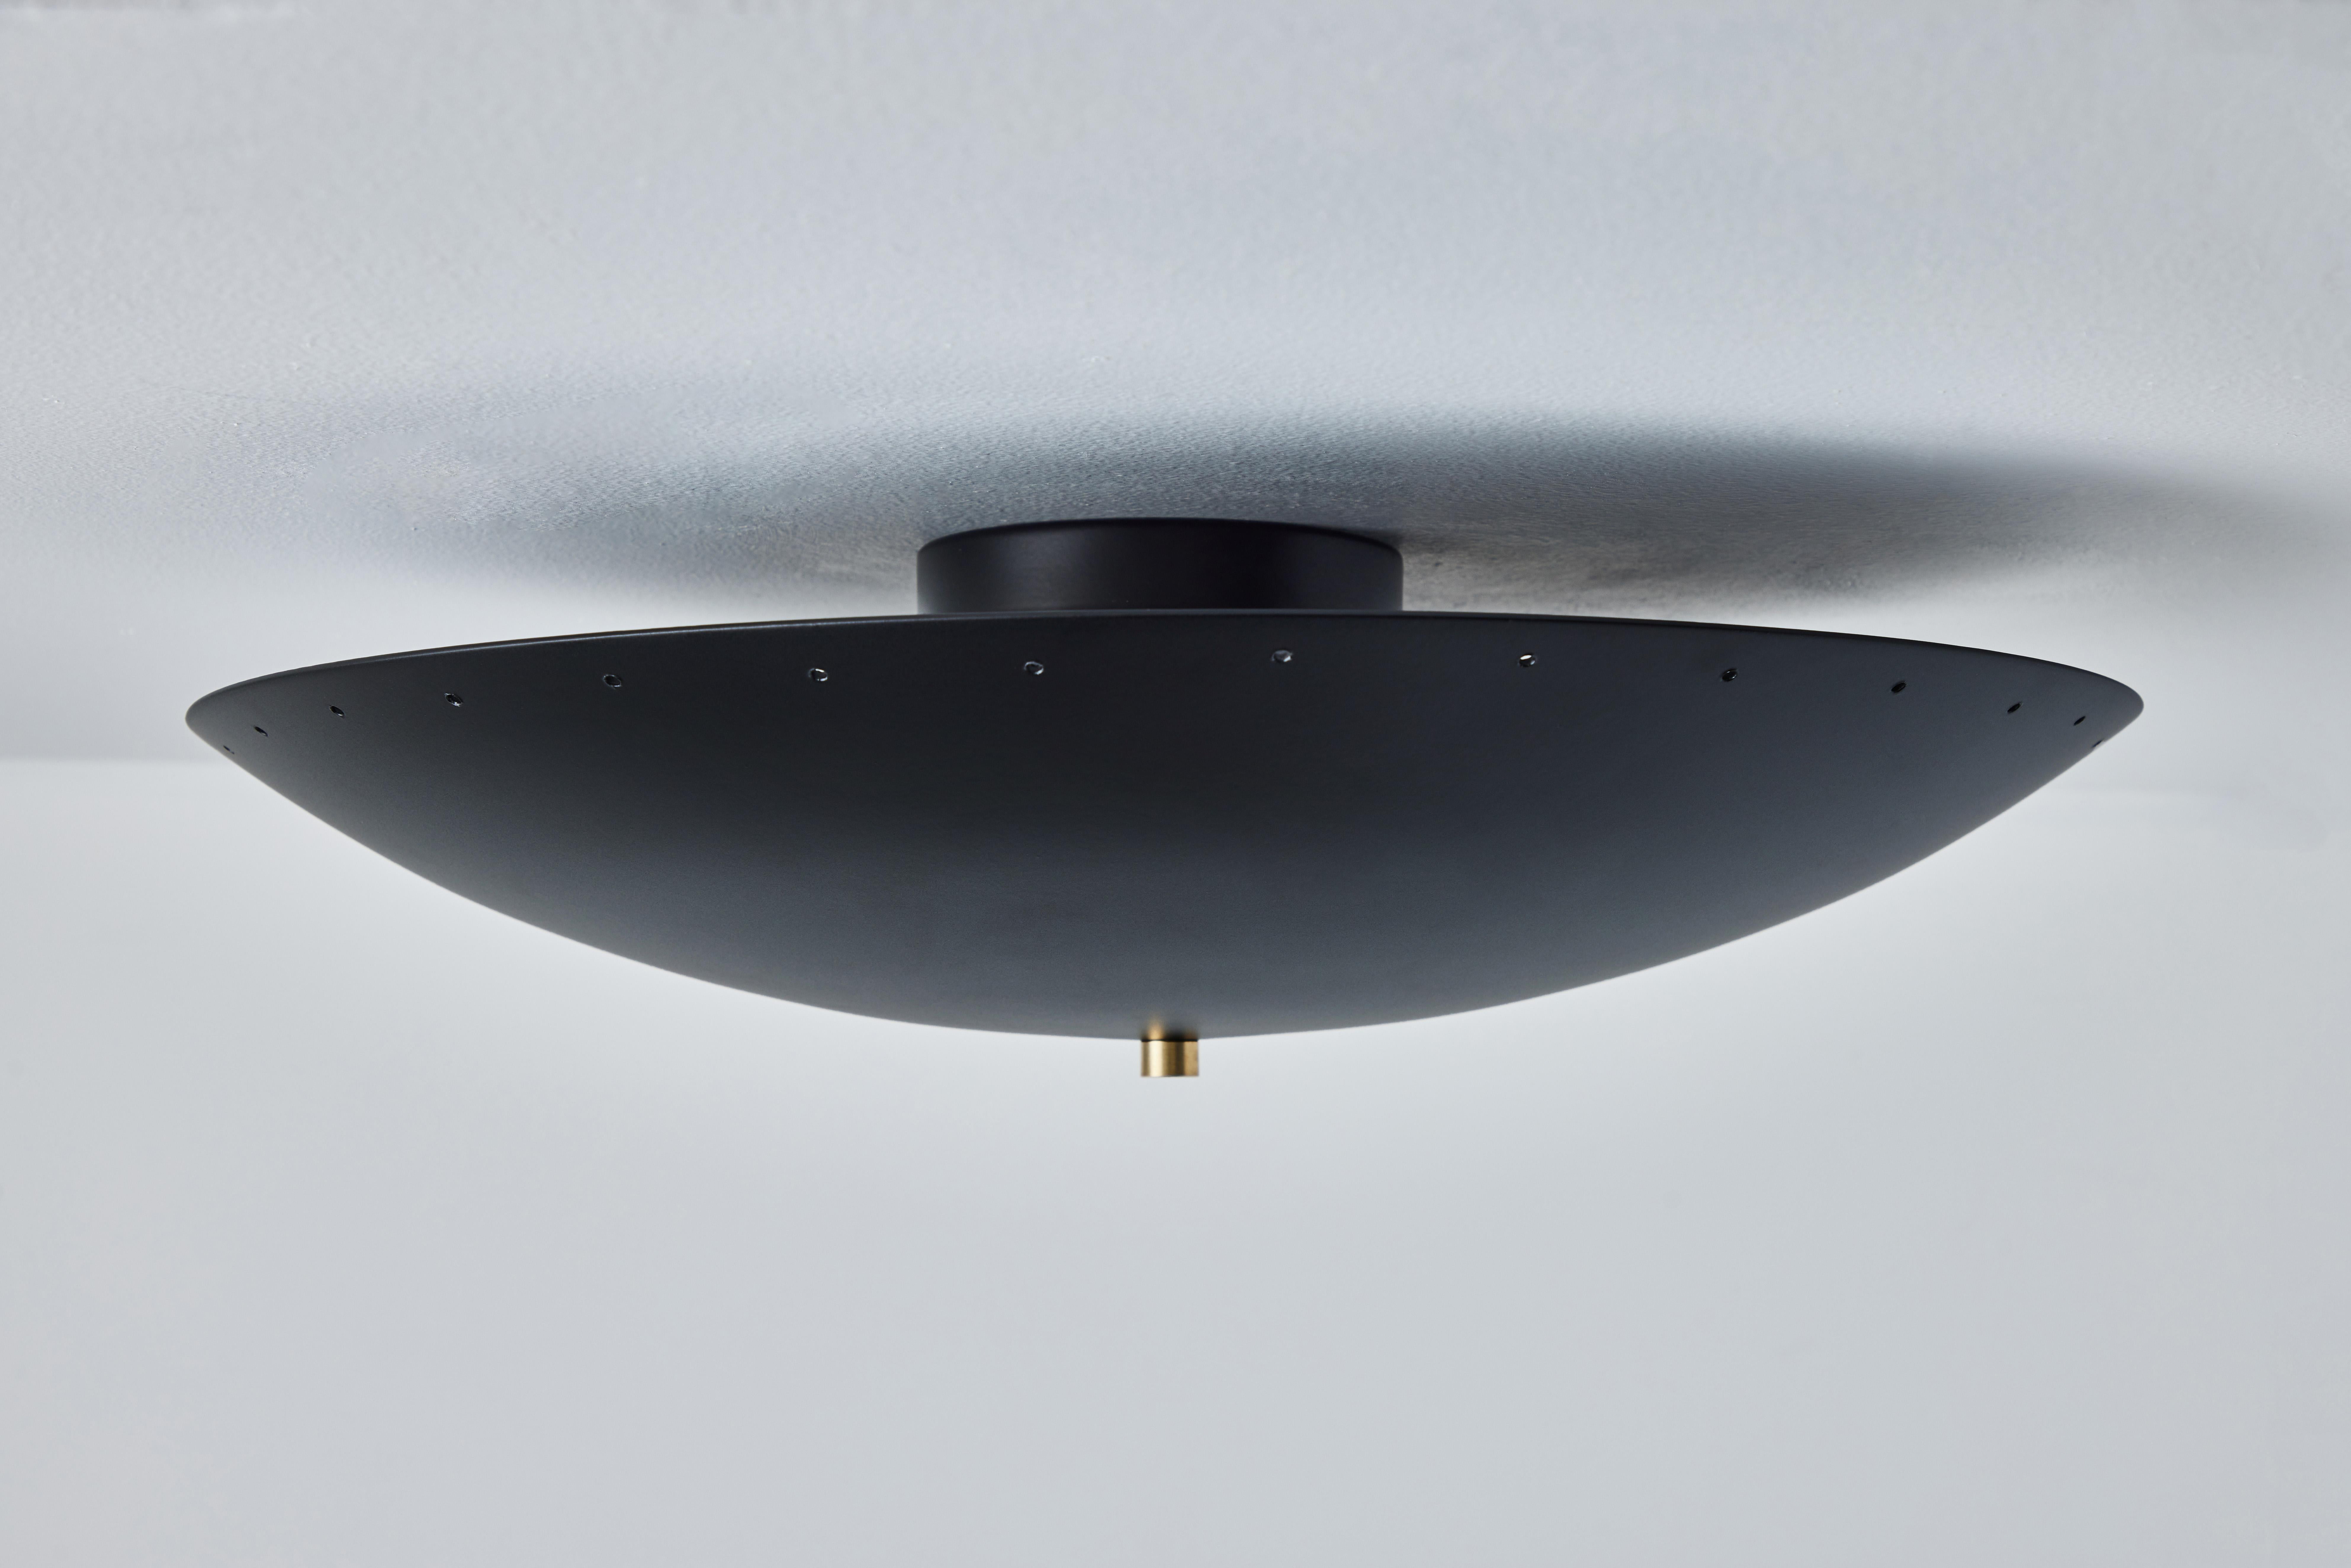 Painted 'Nina' Perforated Dome Ceiling Lamp in Black by Alvaro Benitez For Sale